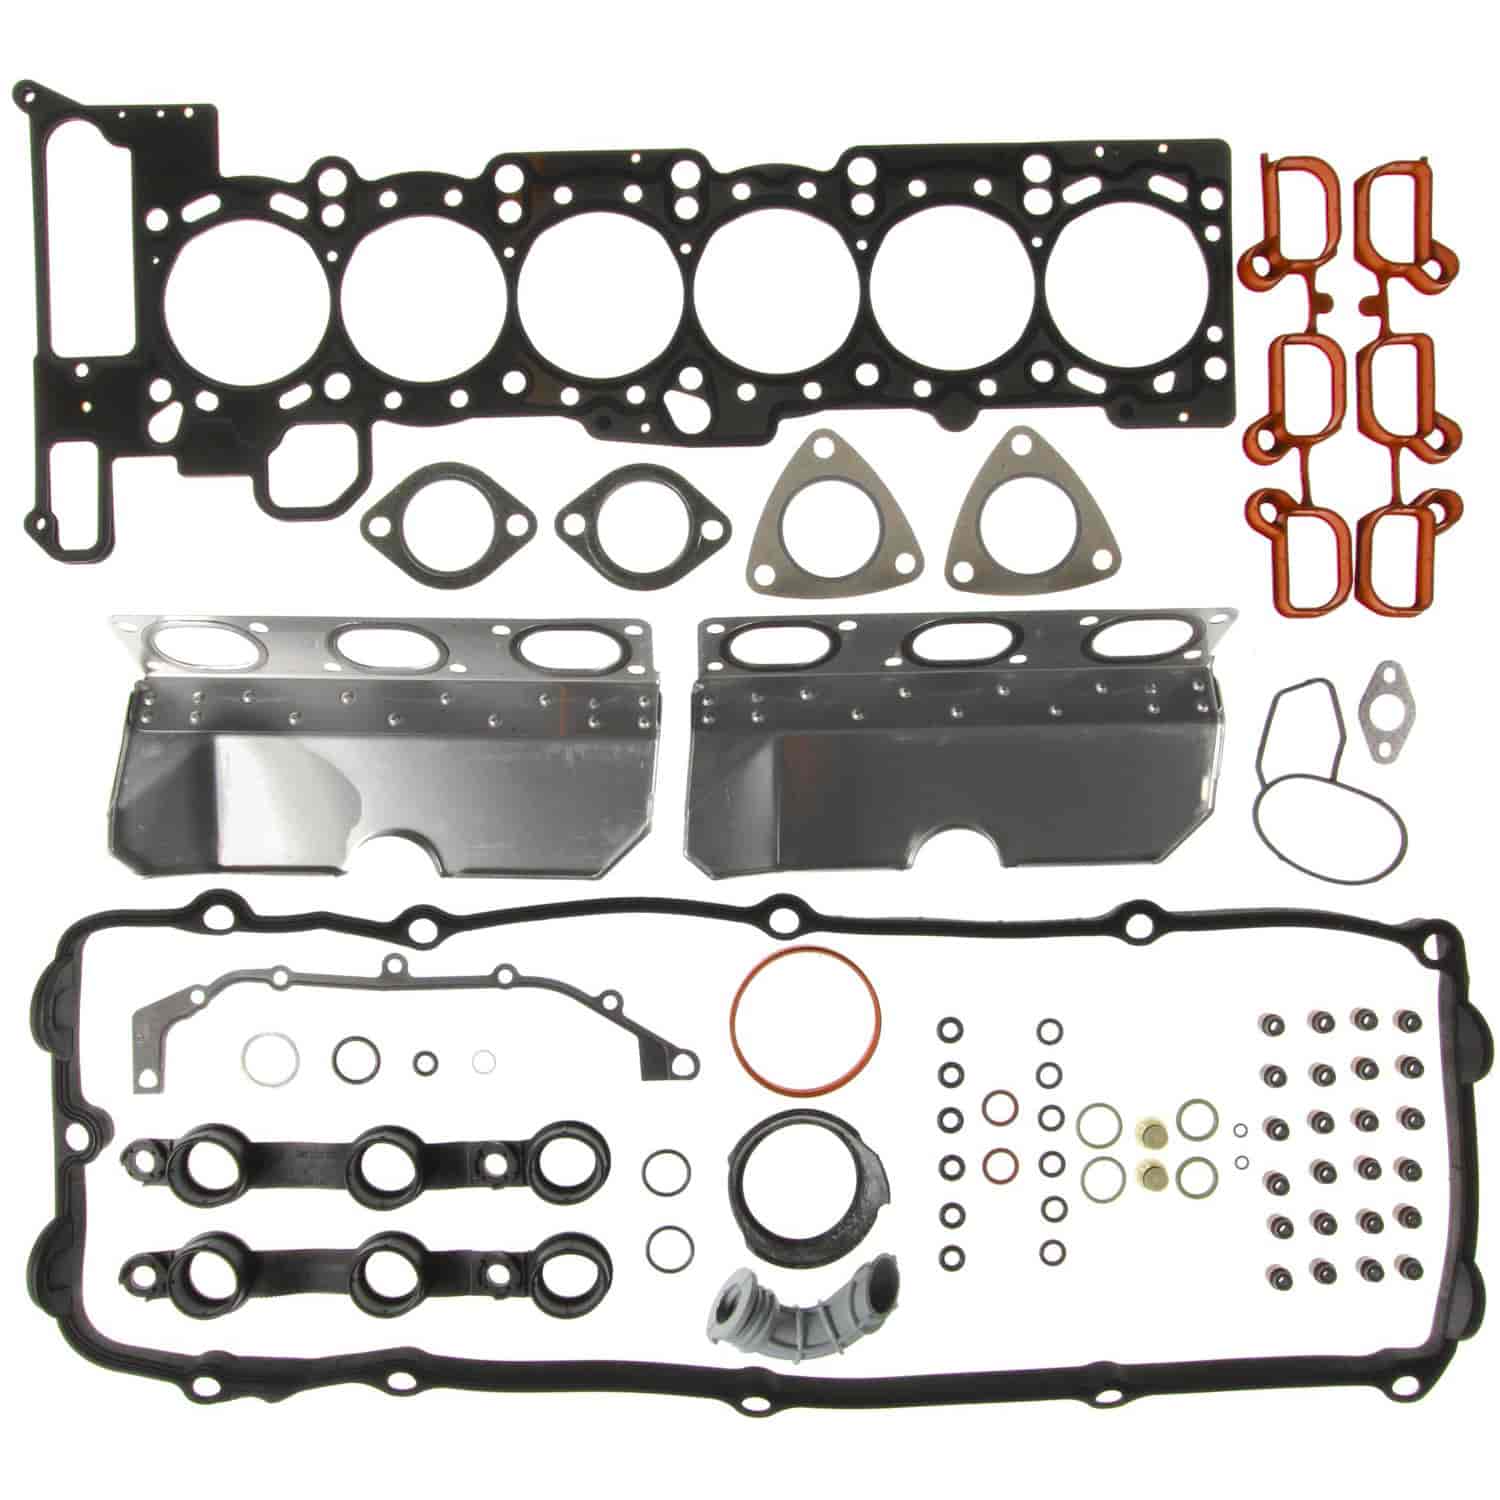 Cylinder Head Set BMW 3 AND 5 SERIES